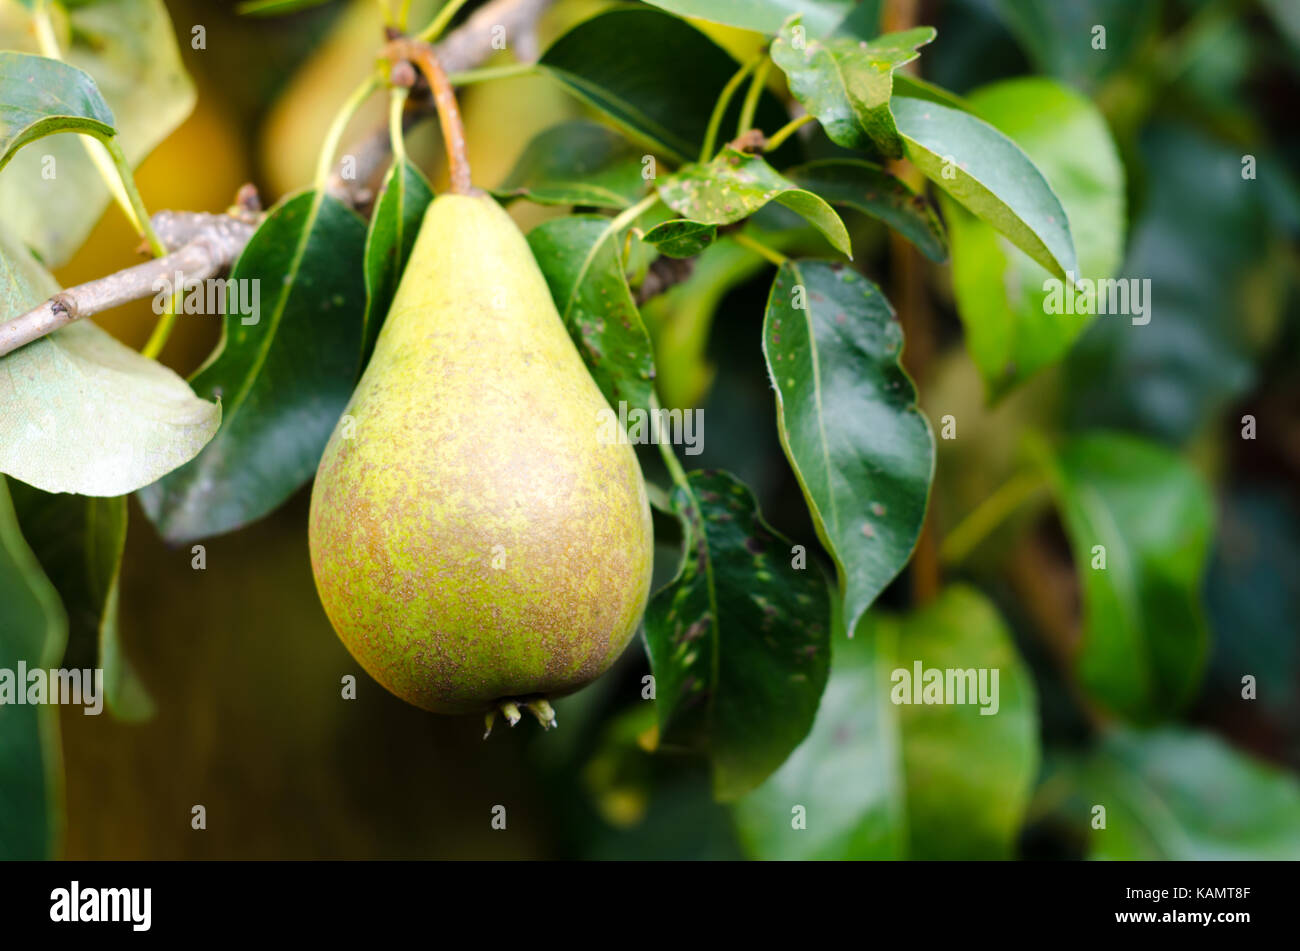 A Pear growing on a Pear Tree in a Garden Stock Photo